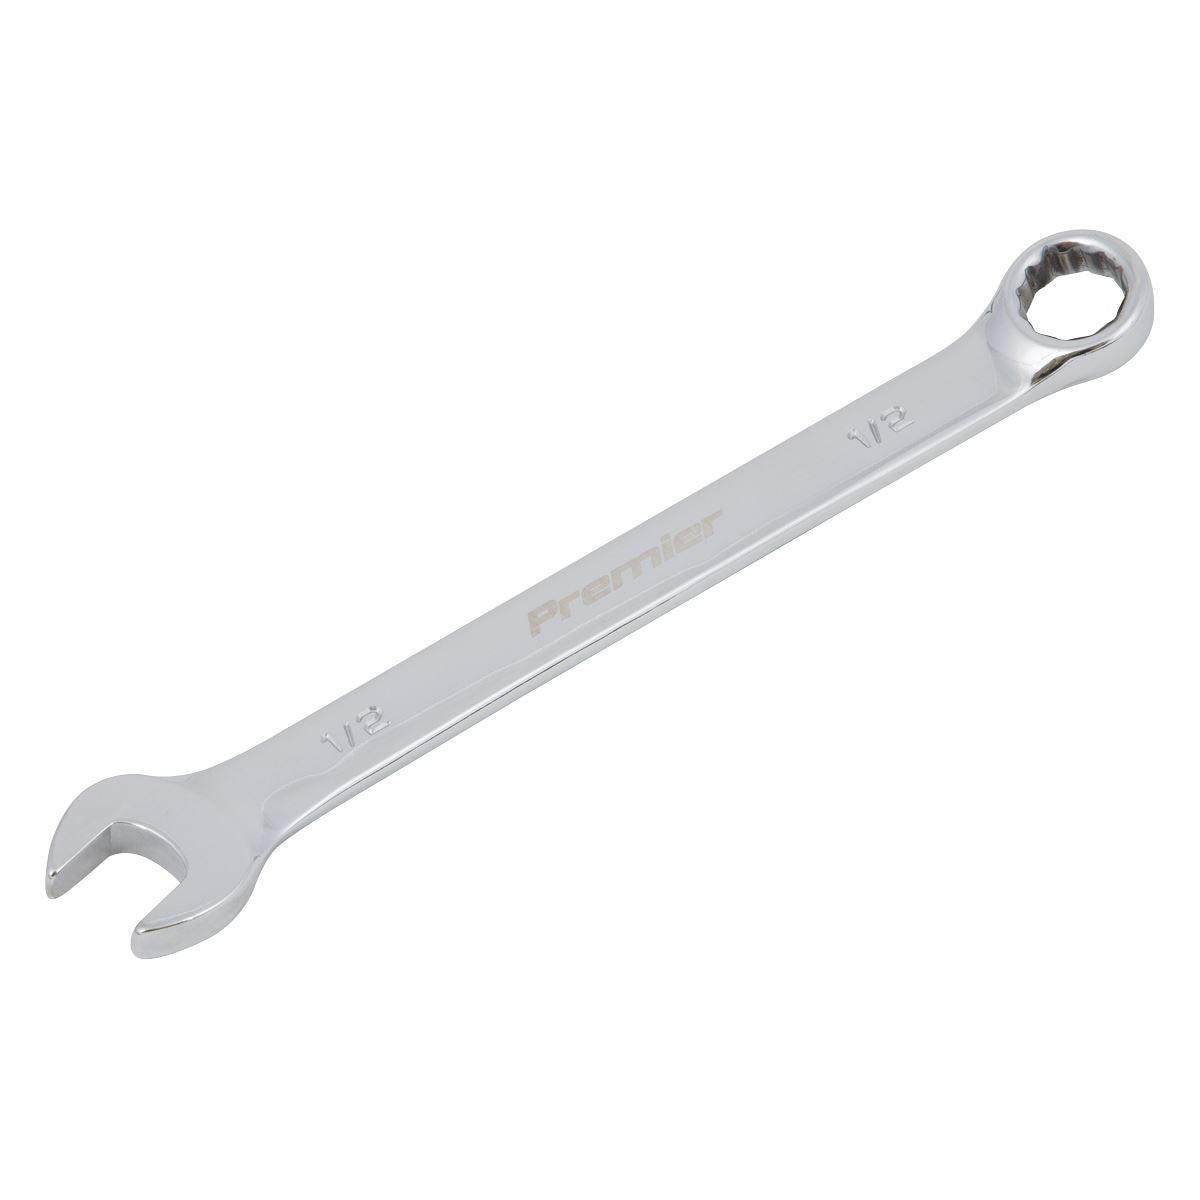 Sealey Premier Combination Spanner 1/2" - Imperial